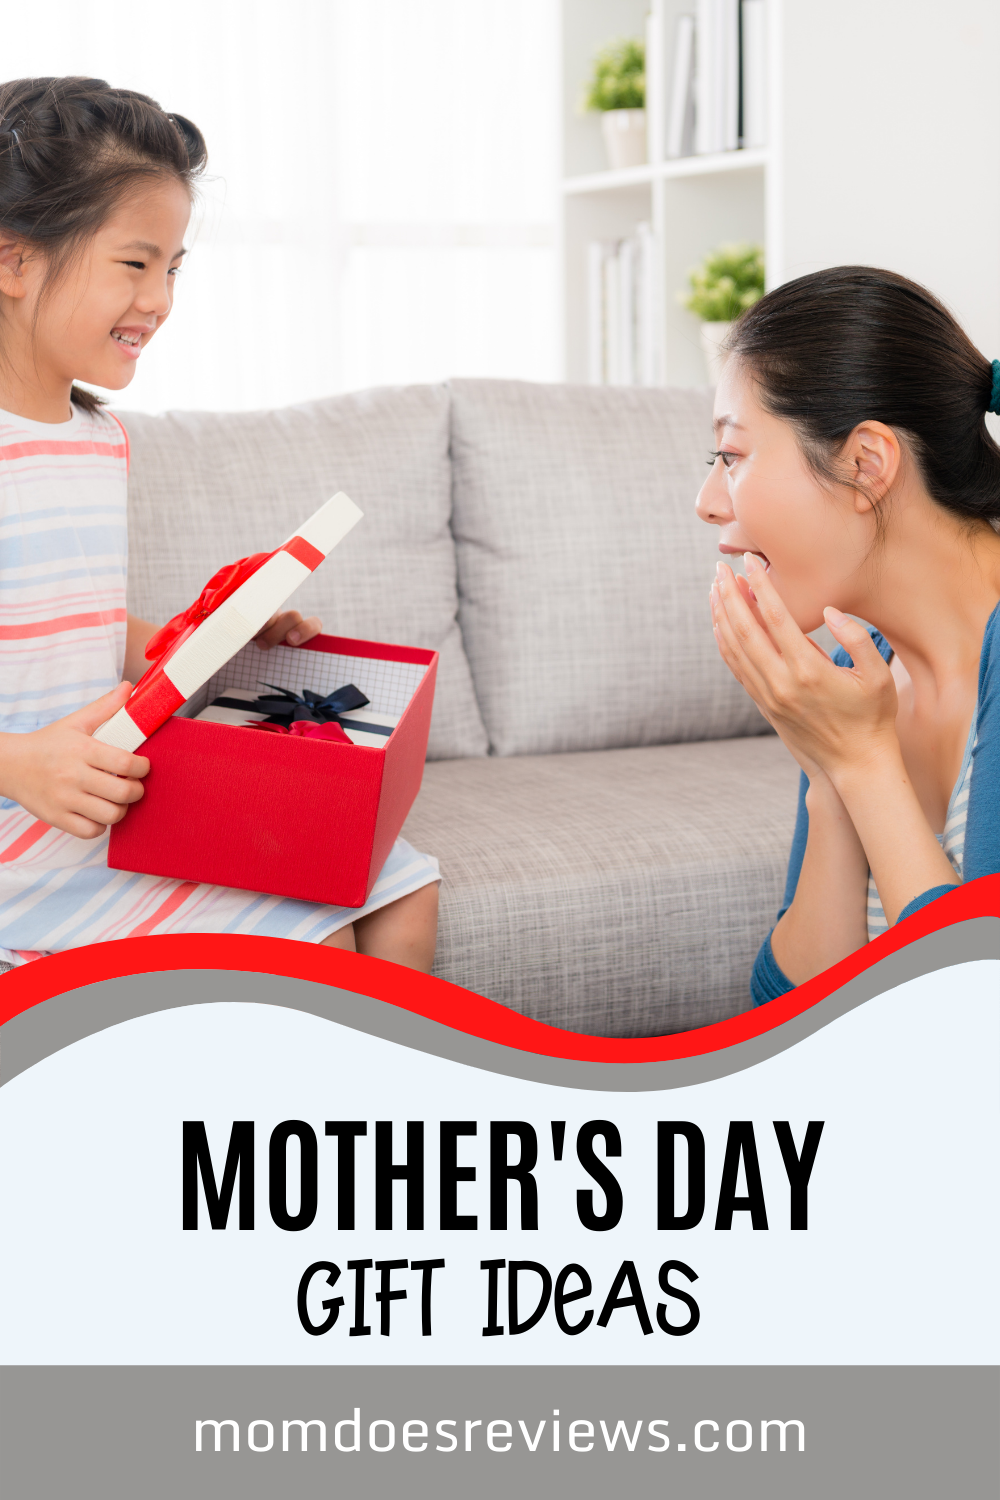 Your Mother’s Day Problems Solved with These Gift Ideas